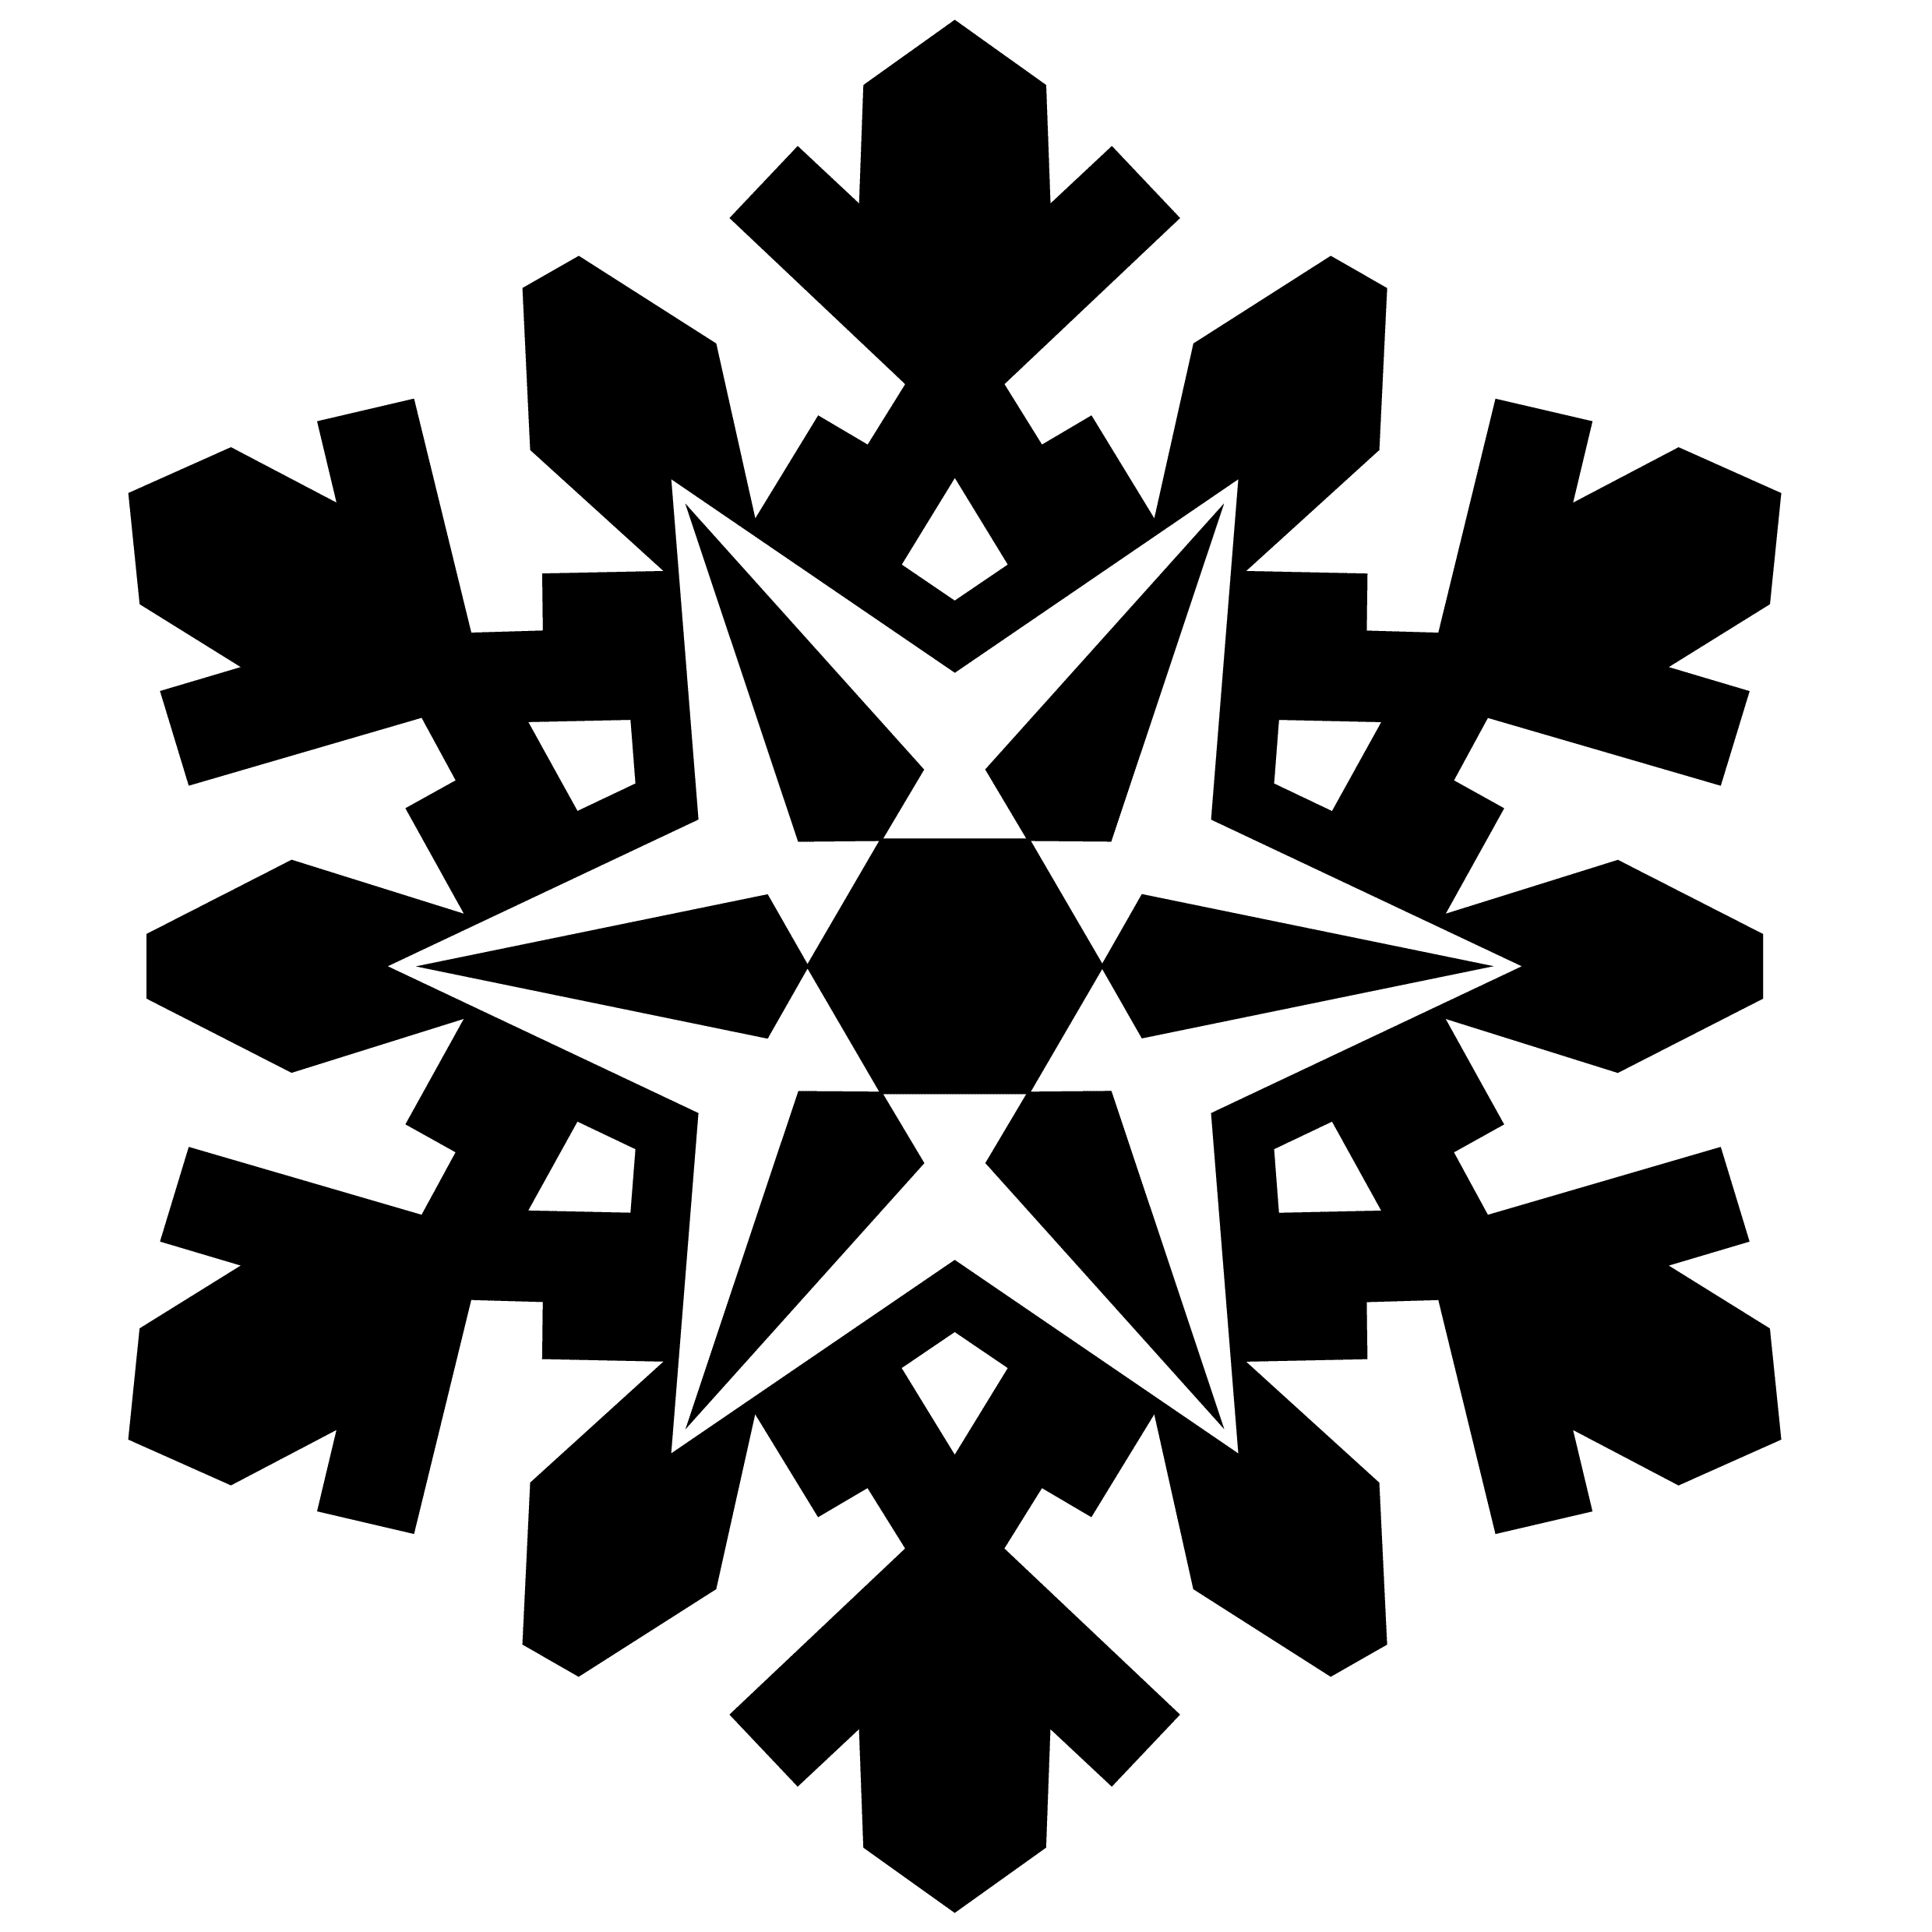 52 Snowflakes Vectors Silhouette And Photoshop Brushes For    